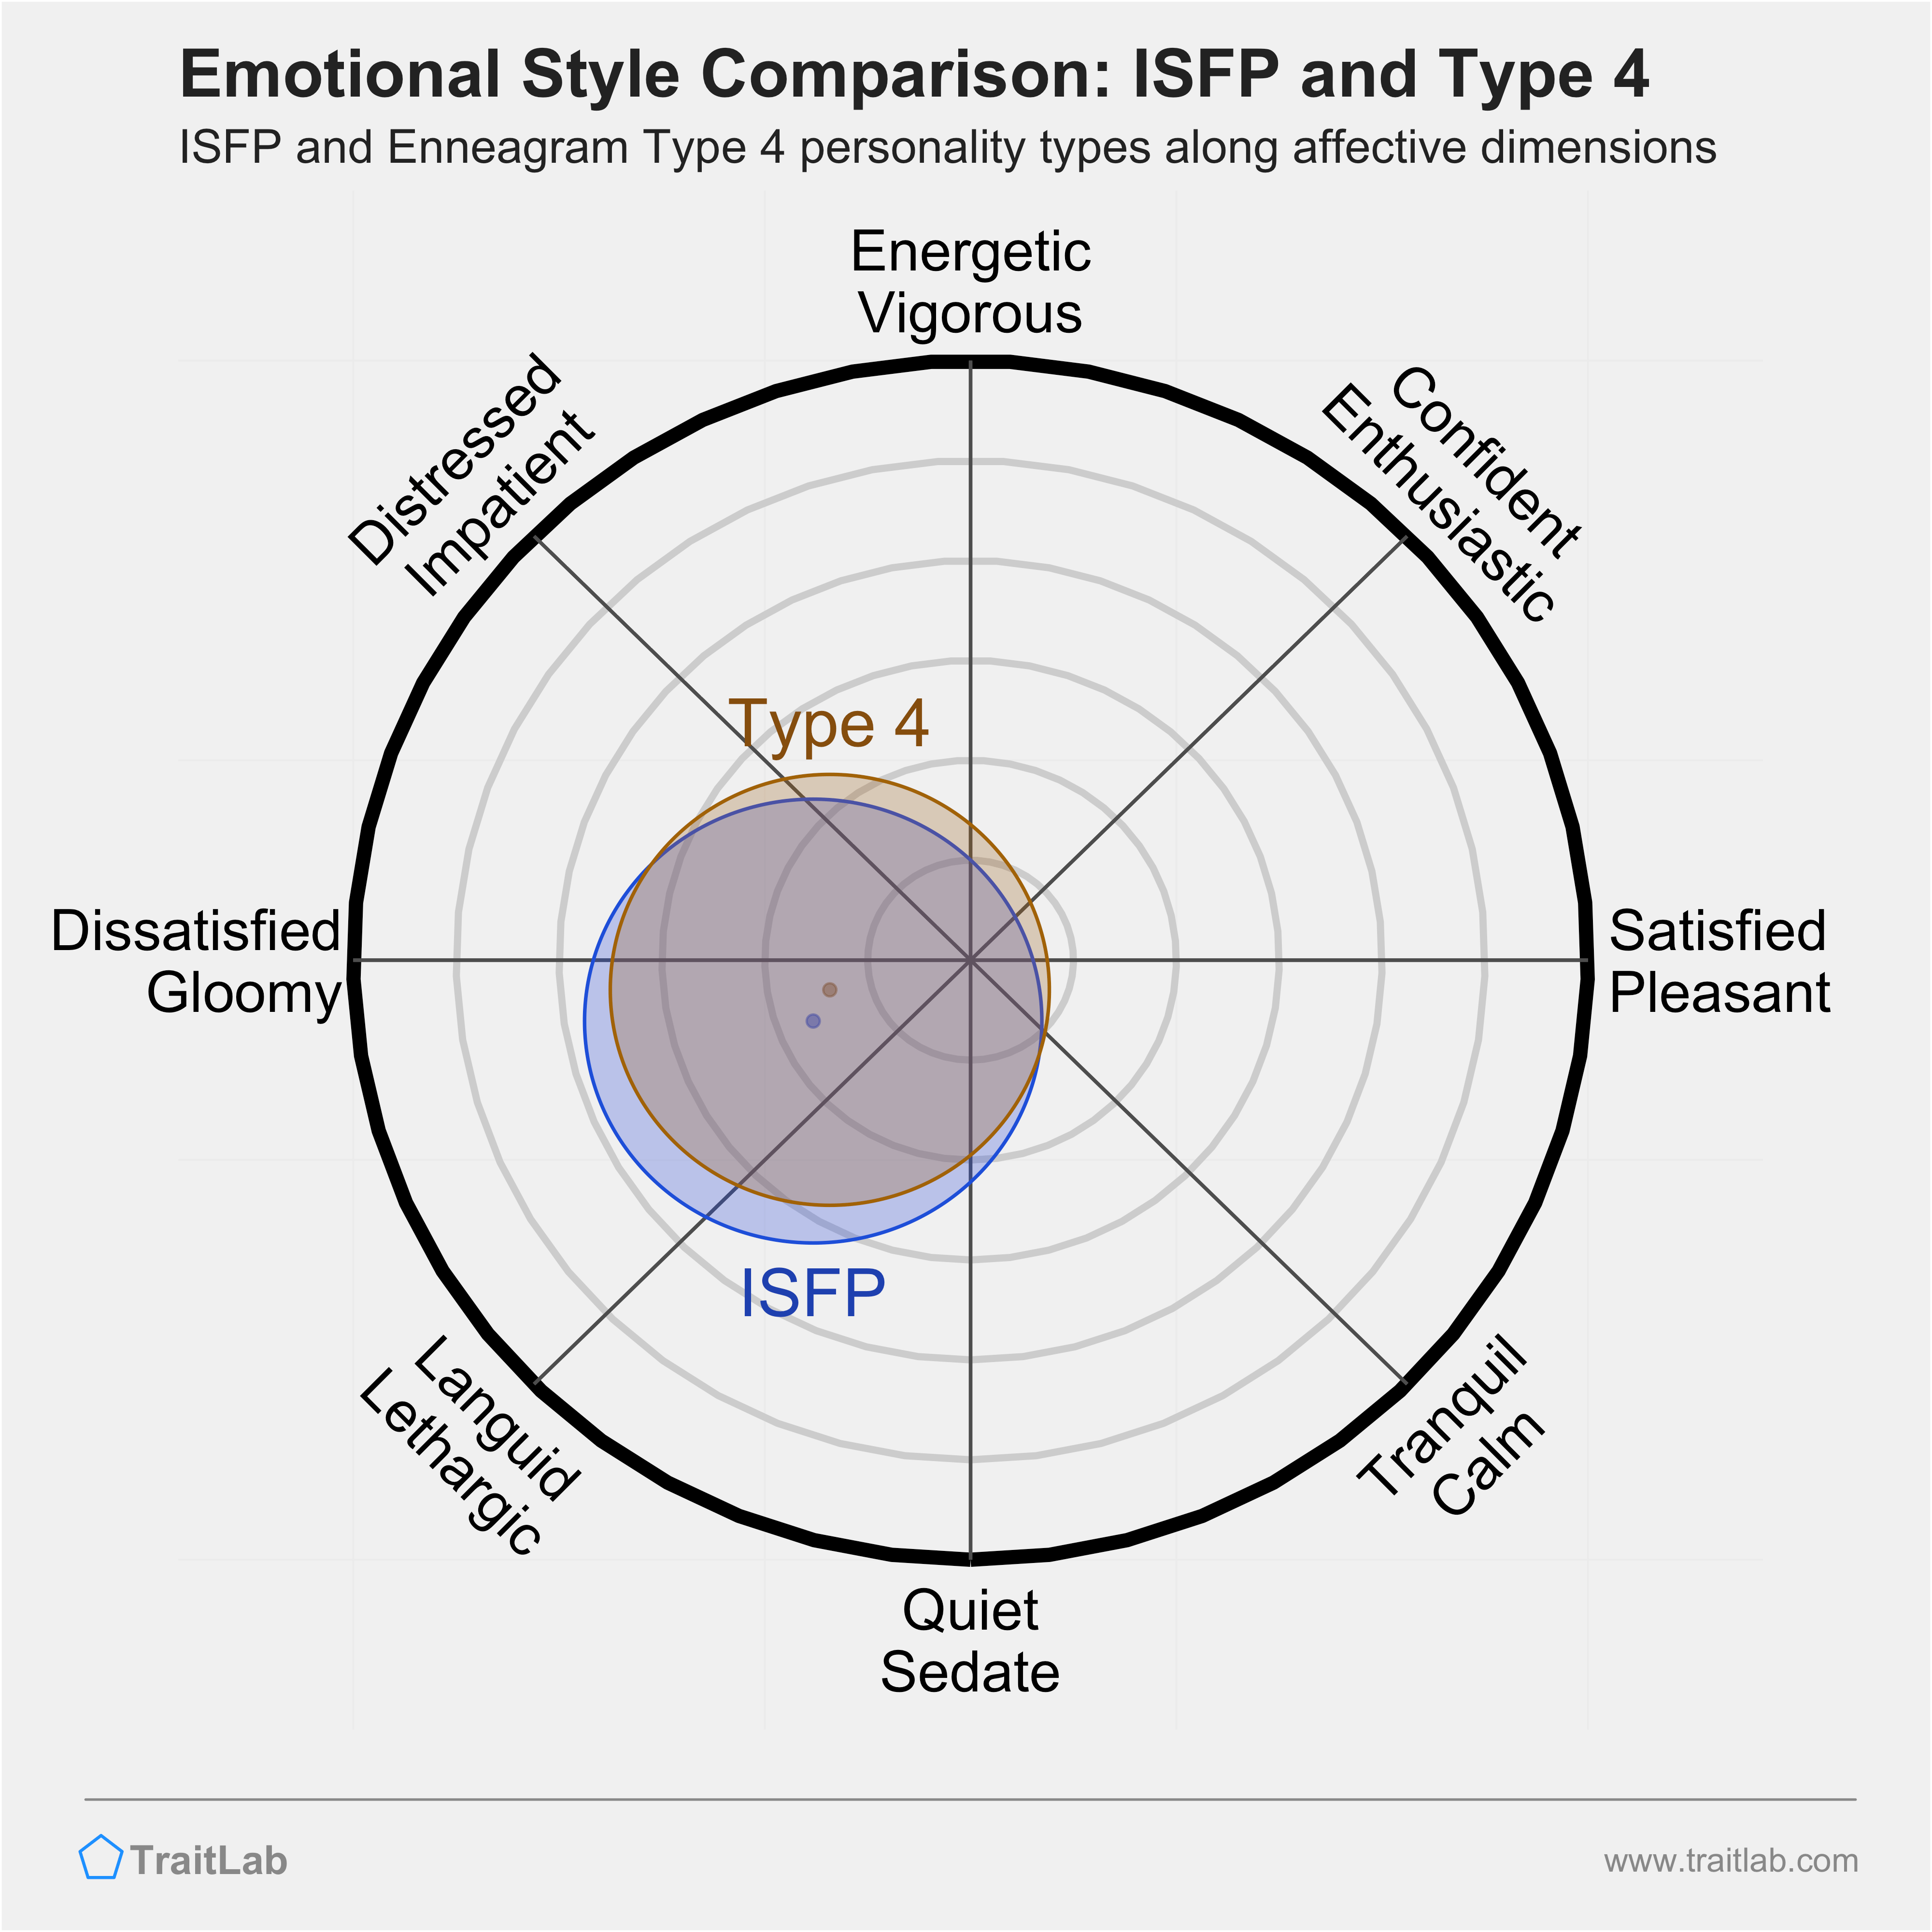 ISFP and Type 4 comparison across emotional (affective) dimensions